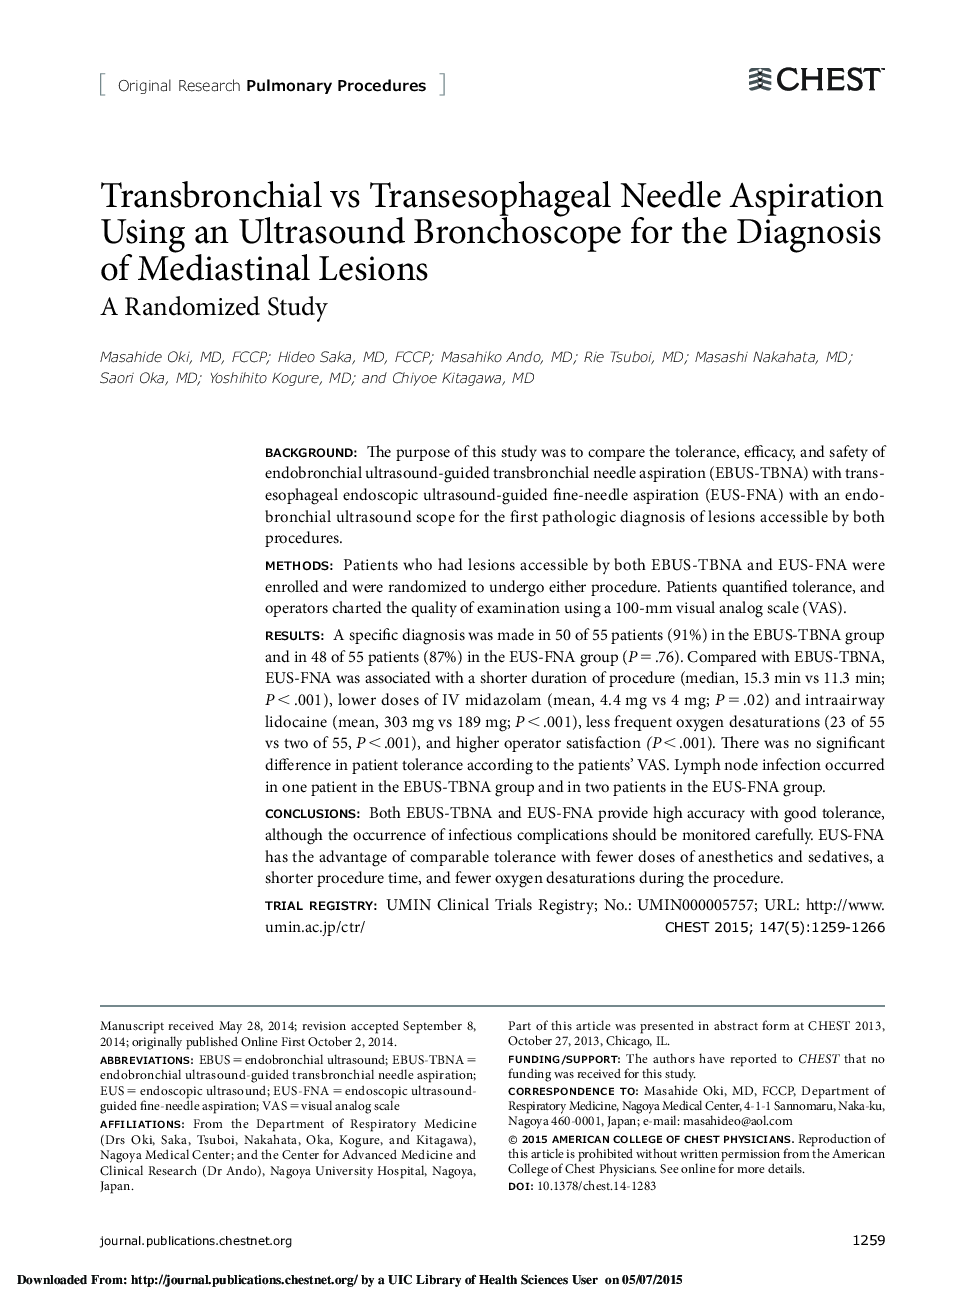 Transbronchial vs Transesophageal Needle Aspiration Using an Ultrasound Bronchoscope for the Diagnosis of Mediastinal Lesions